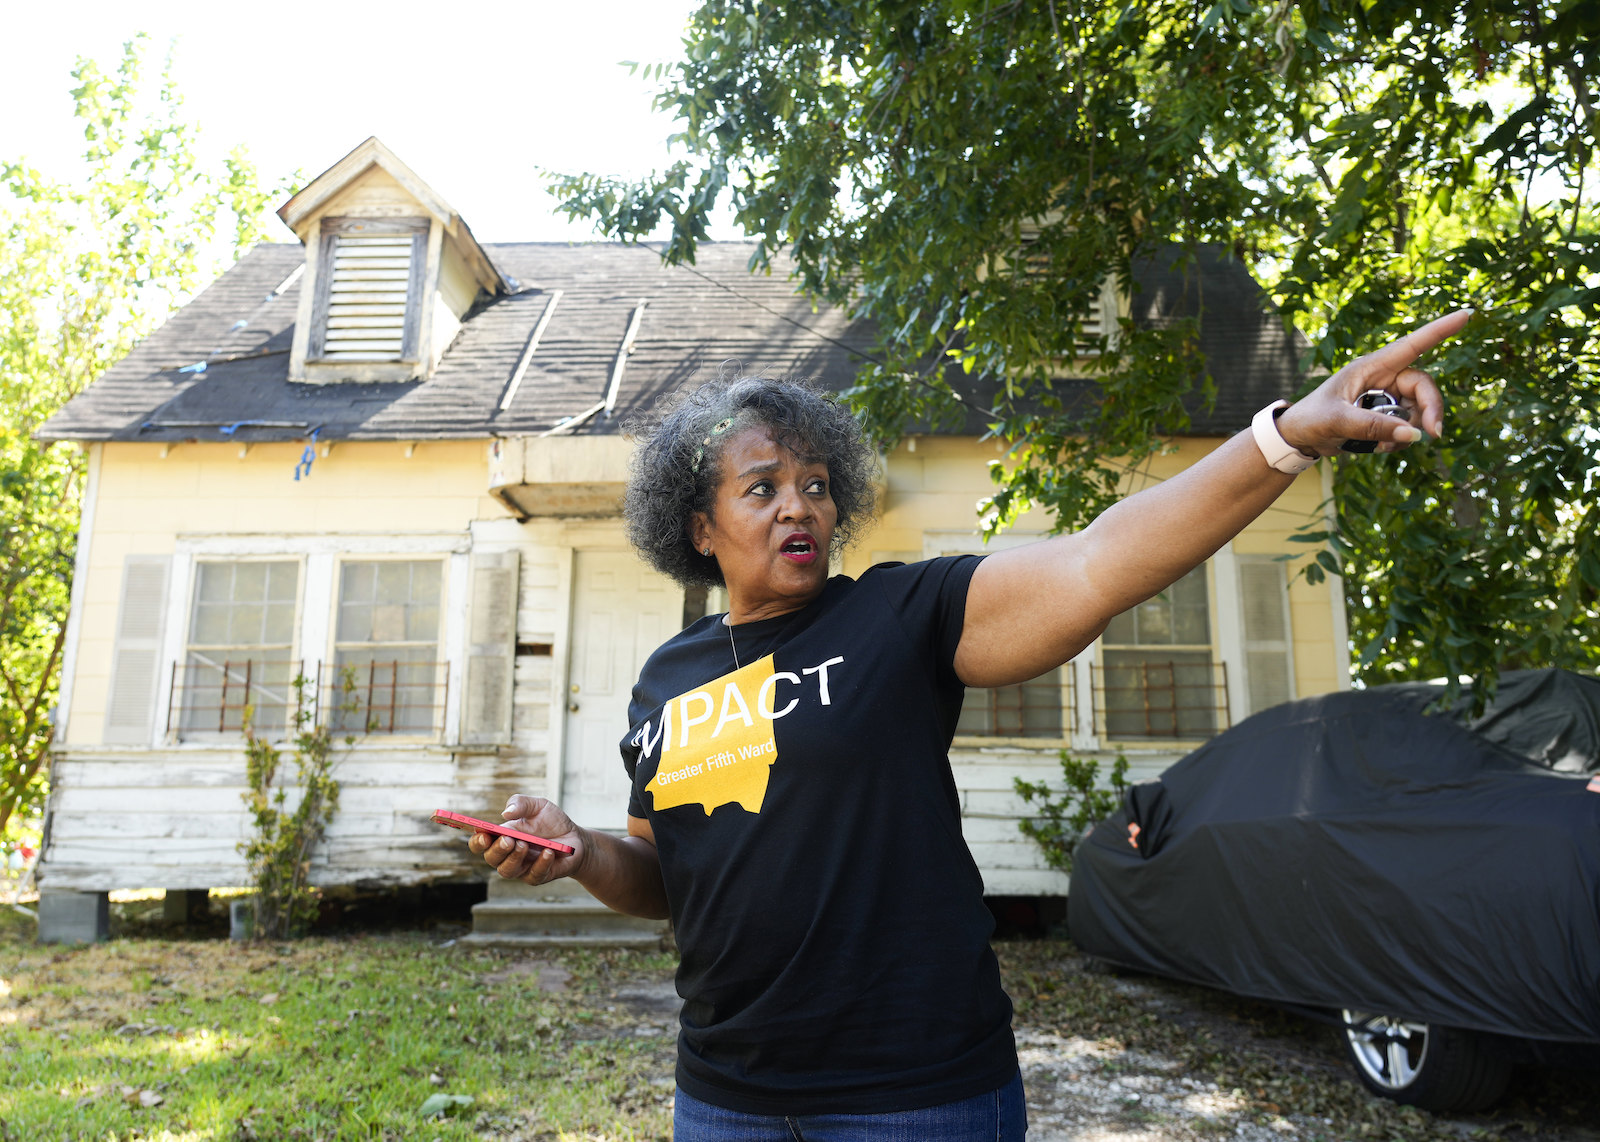 A woman in a black t-shirt with a yellow logo points beyond the camera while standing in front of a house